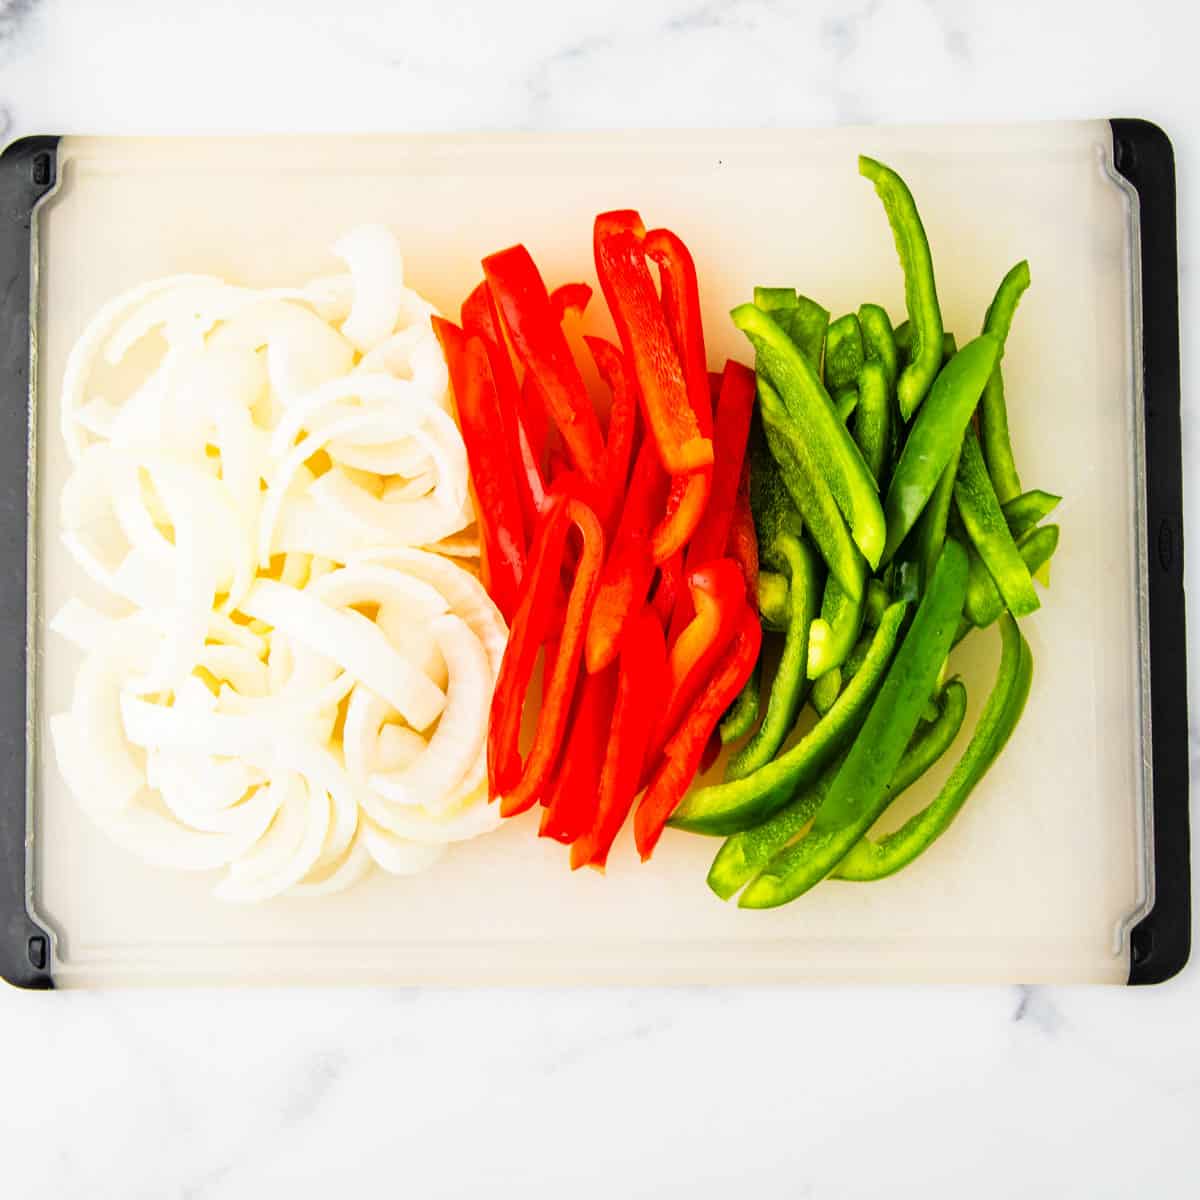 Sliced peppers and onions on a cutting board.